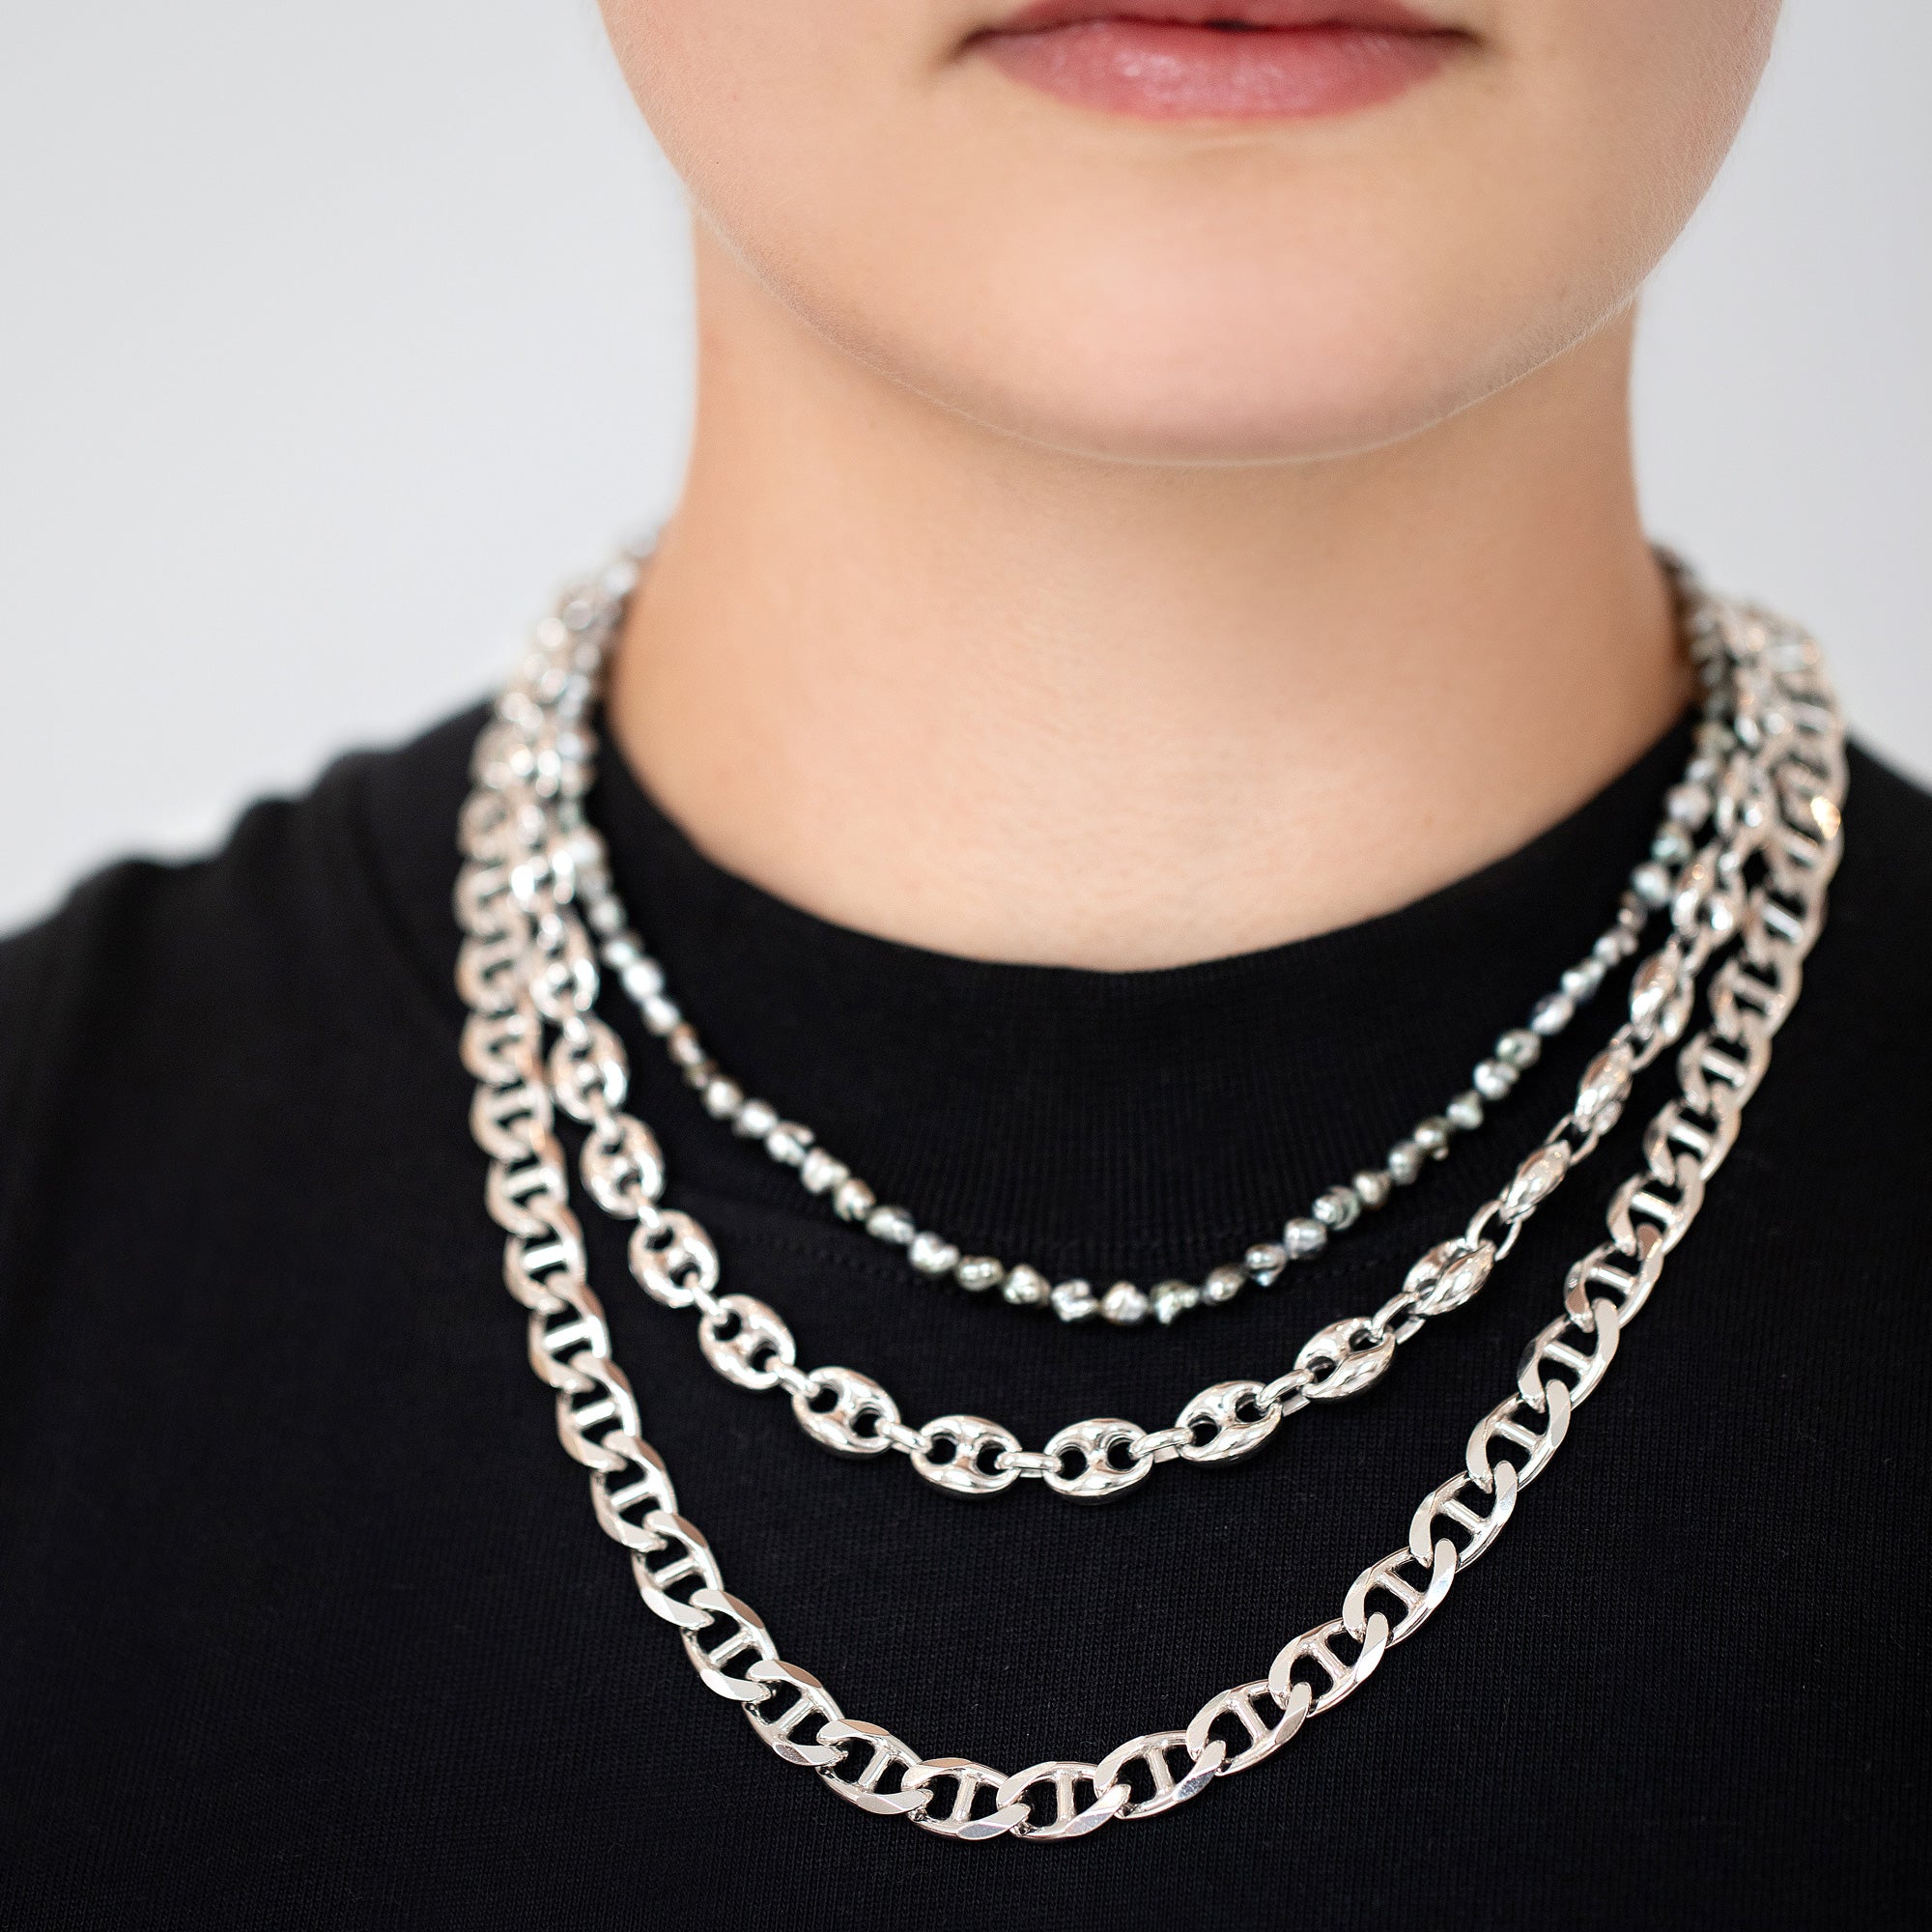 product_details::Silver Mariner Chain on model.